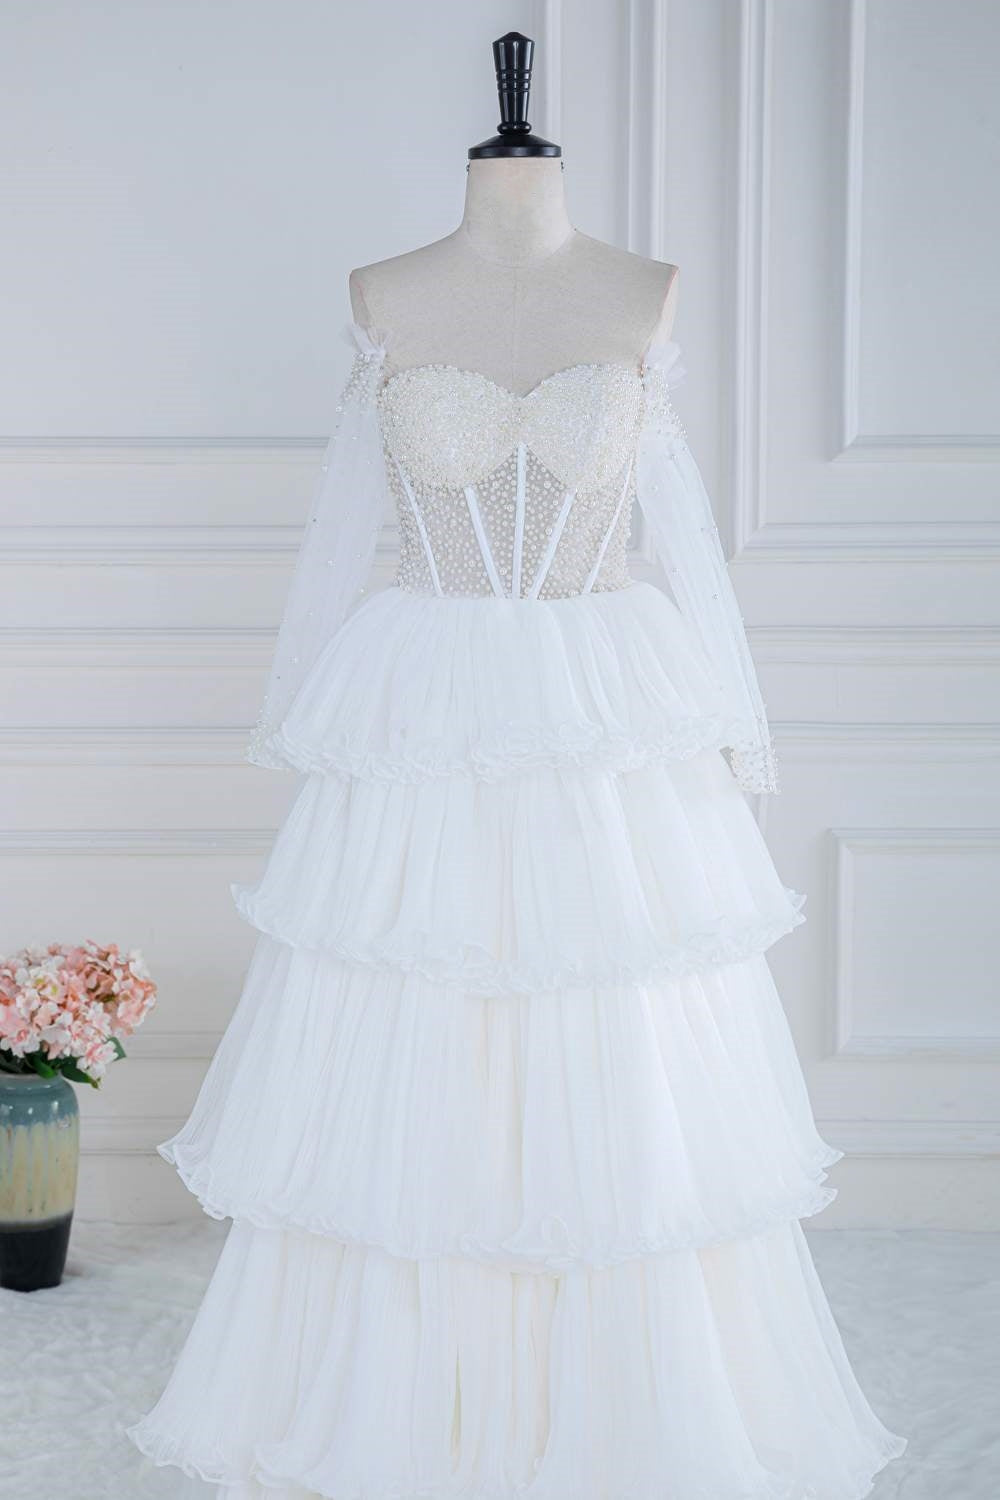 Prom Dresses Style, Off the Shoulder White Beaded Top Ruffle Tiered Prom Dress